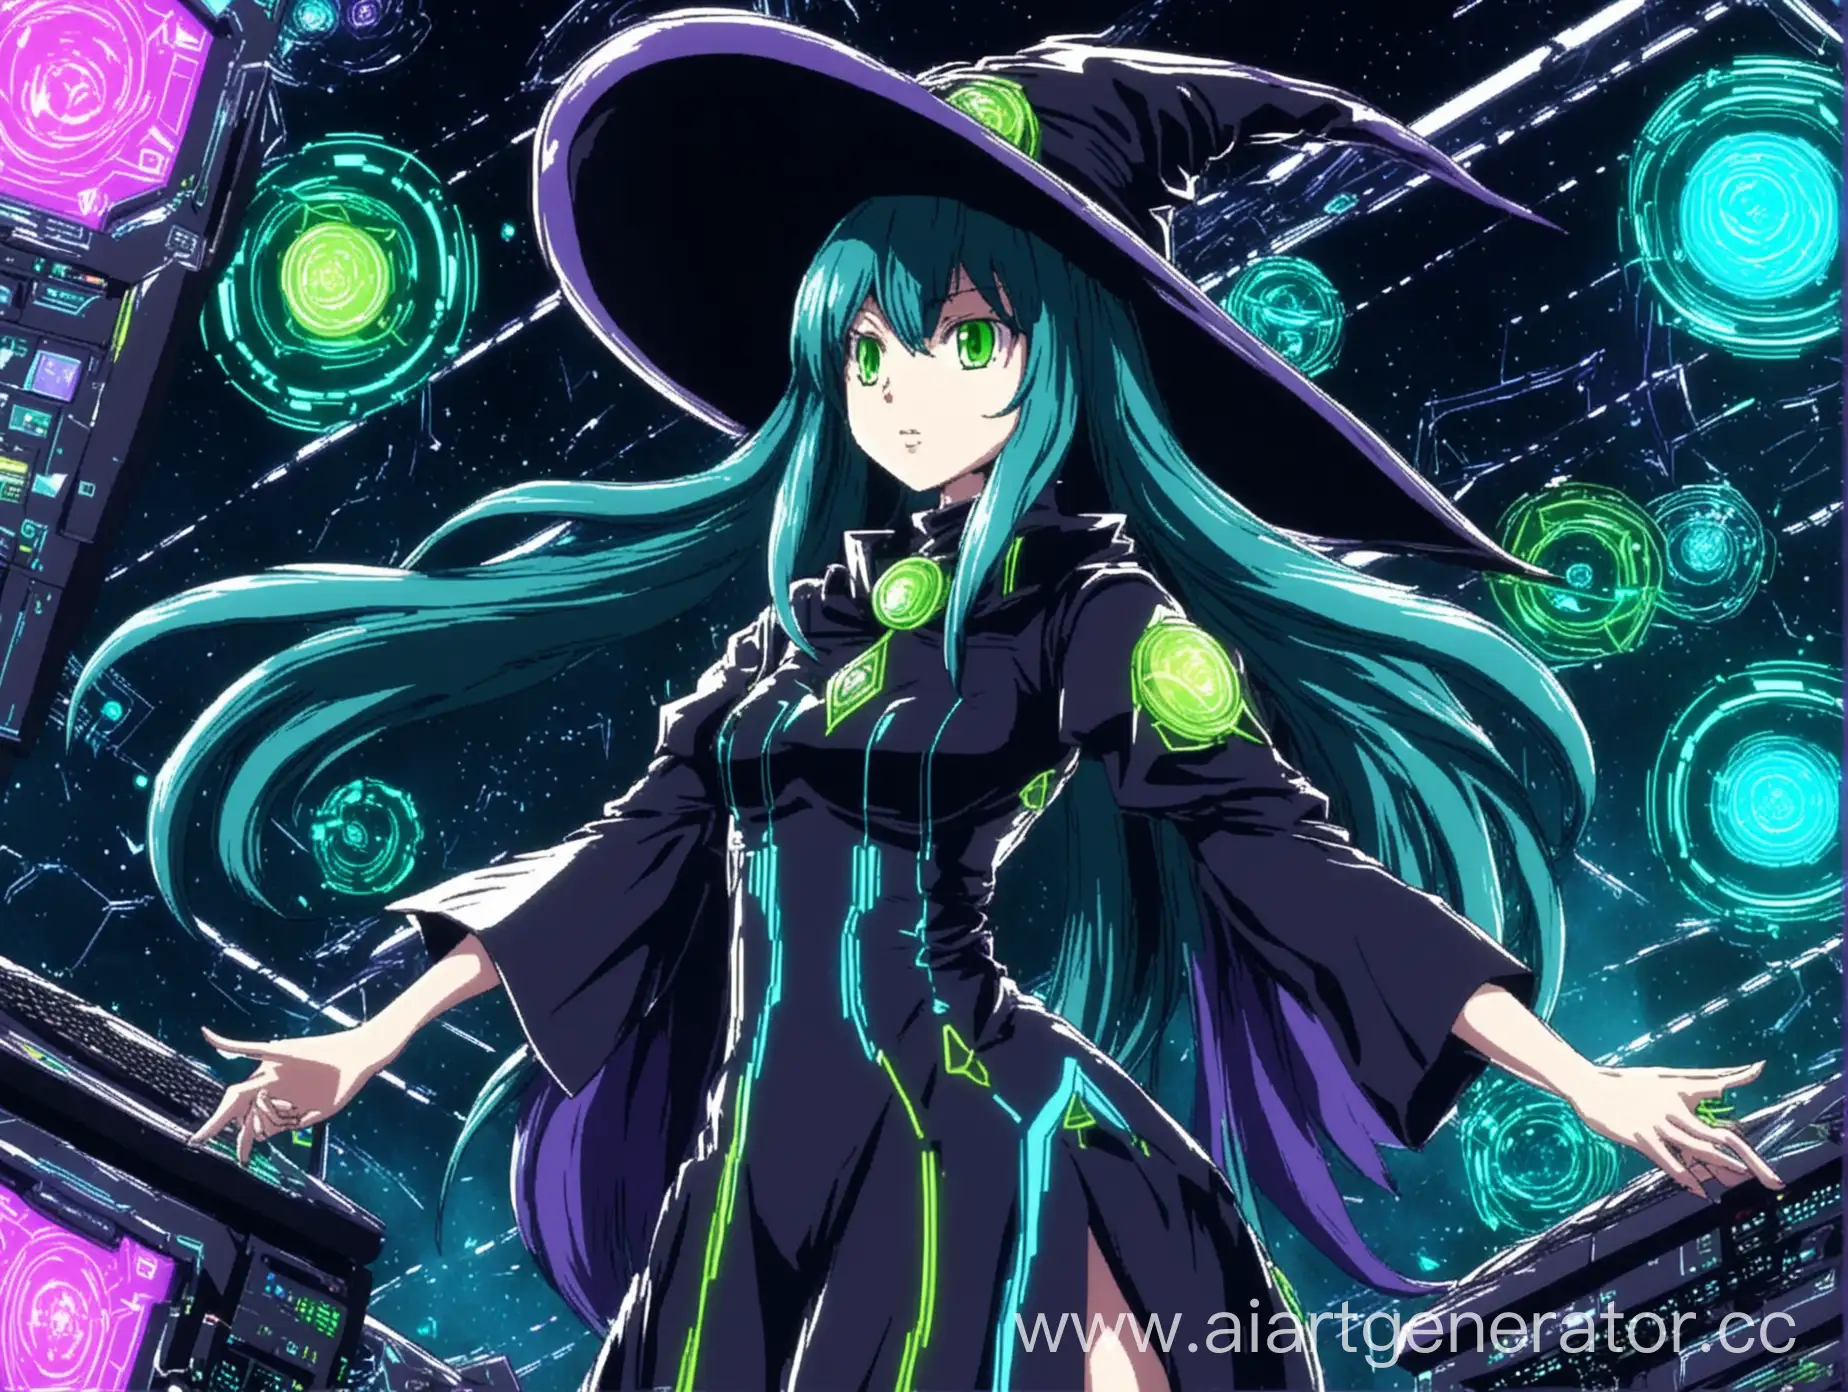 Futuristic-Witches-in-Diverse-Color-Gamma-Frame-from-Anime-Computer-Game